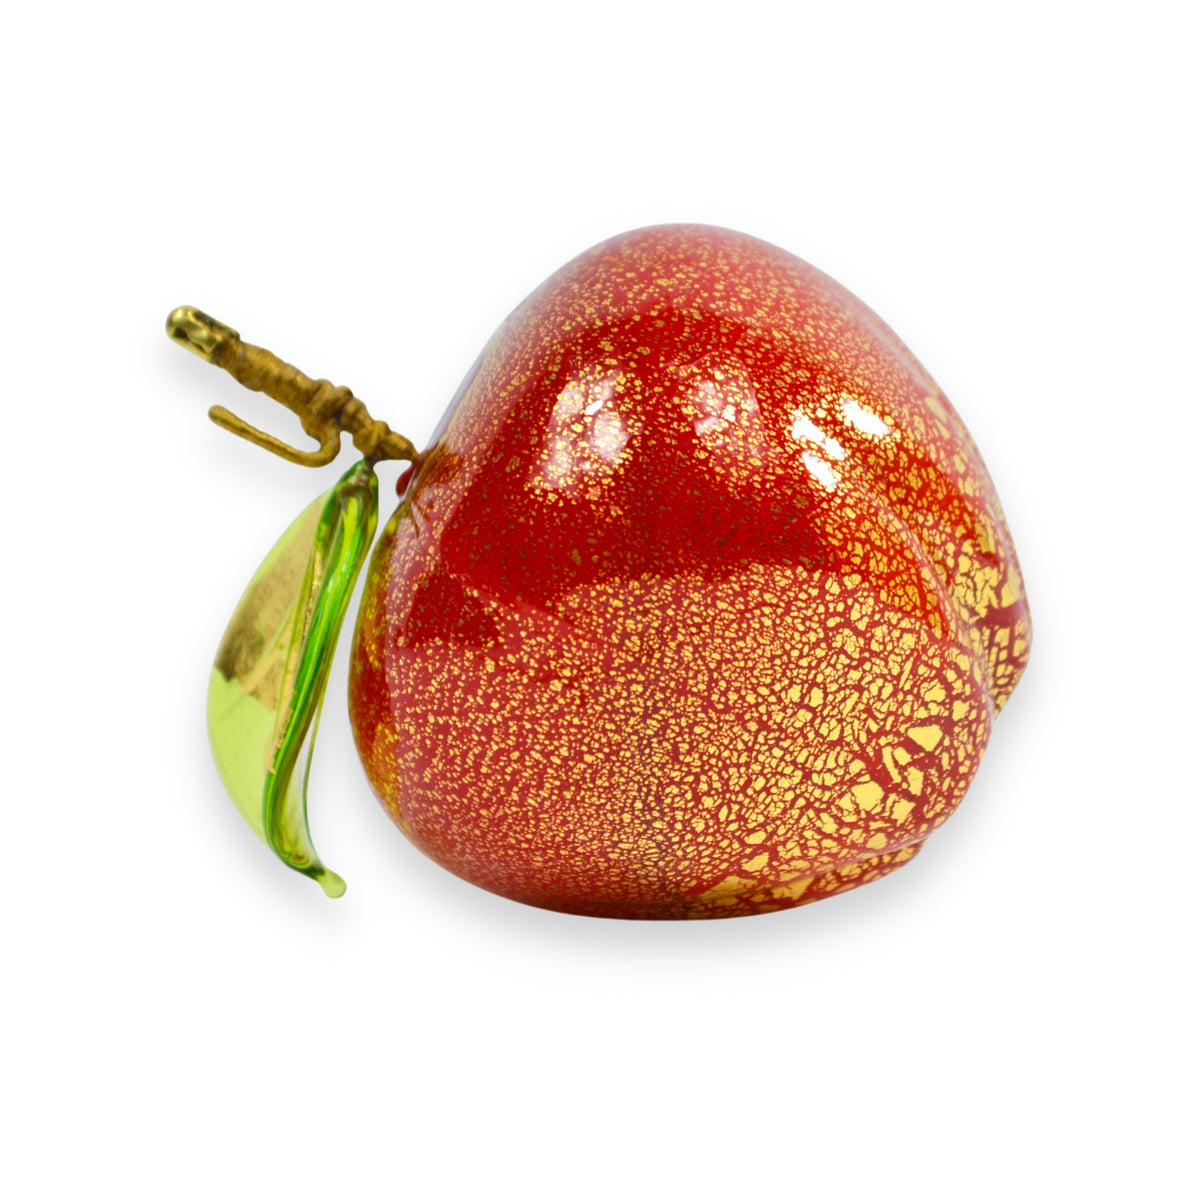 Murano Blown Glass Apple, Red with Gold Foil, Hand Blown in Italy - My Italian Decor